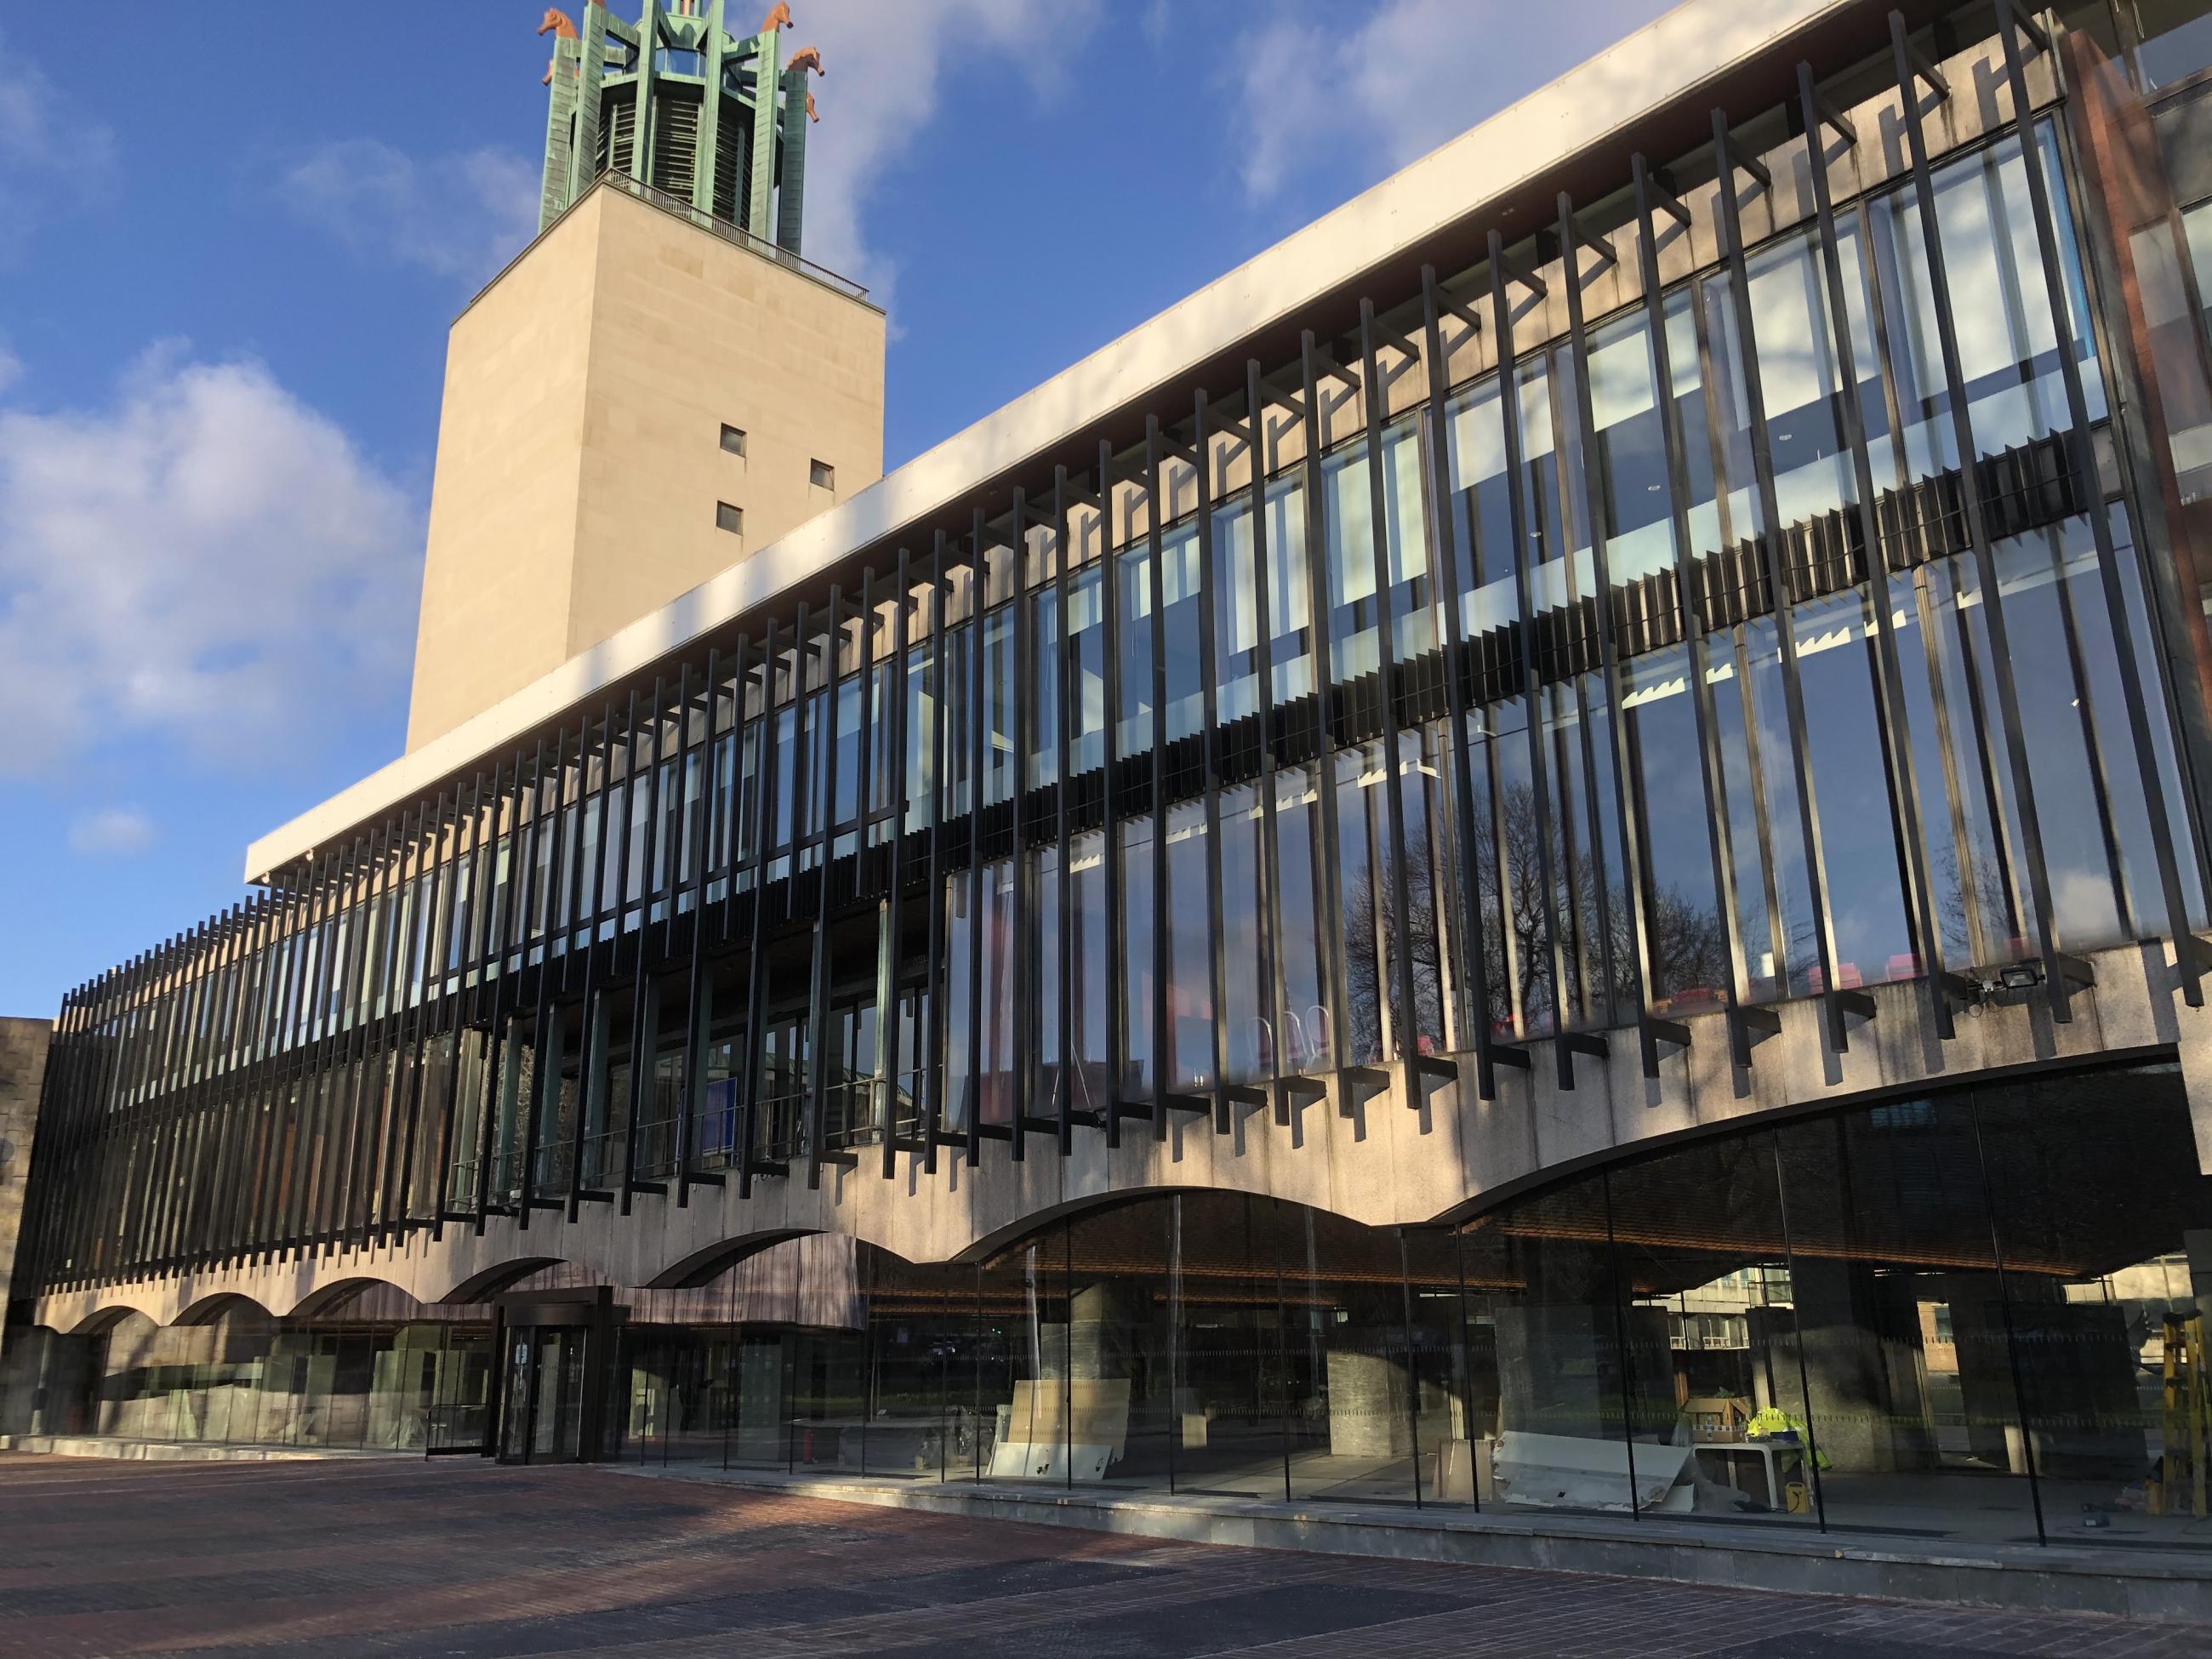 Photo showing the outside of the Civic Centre in Newcastle.